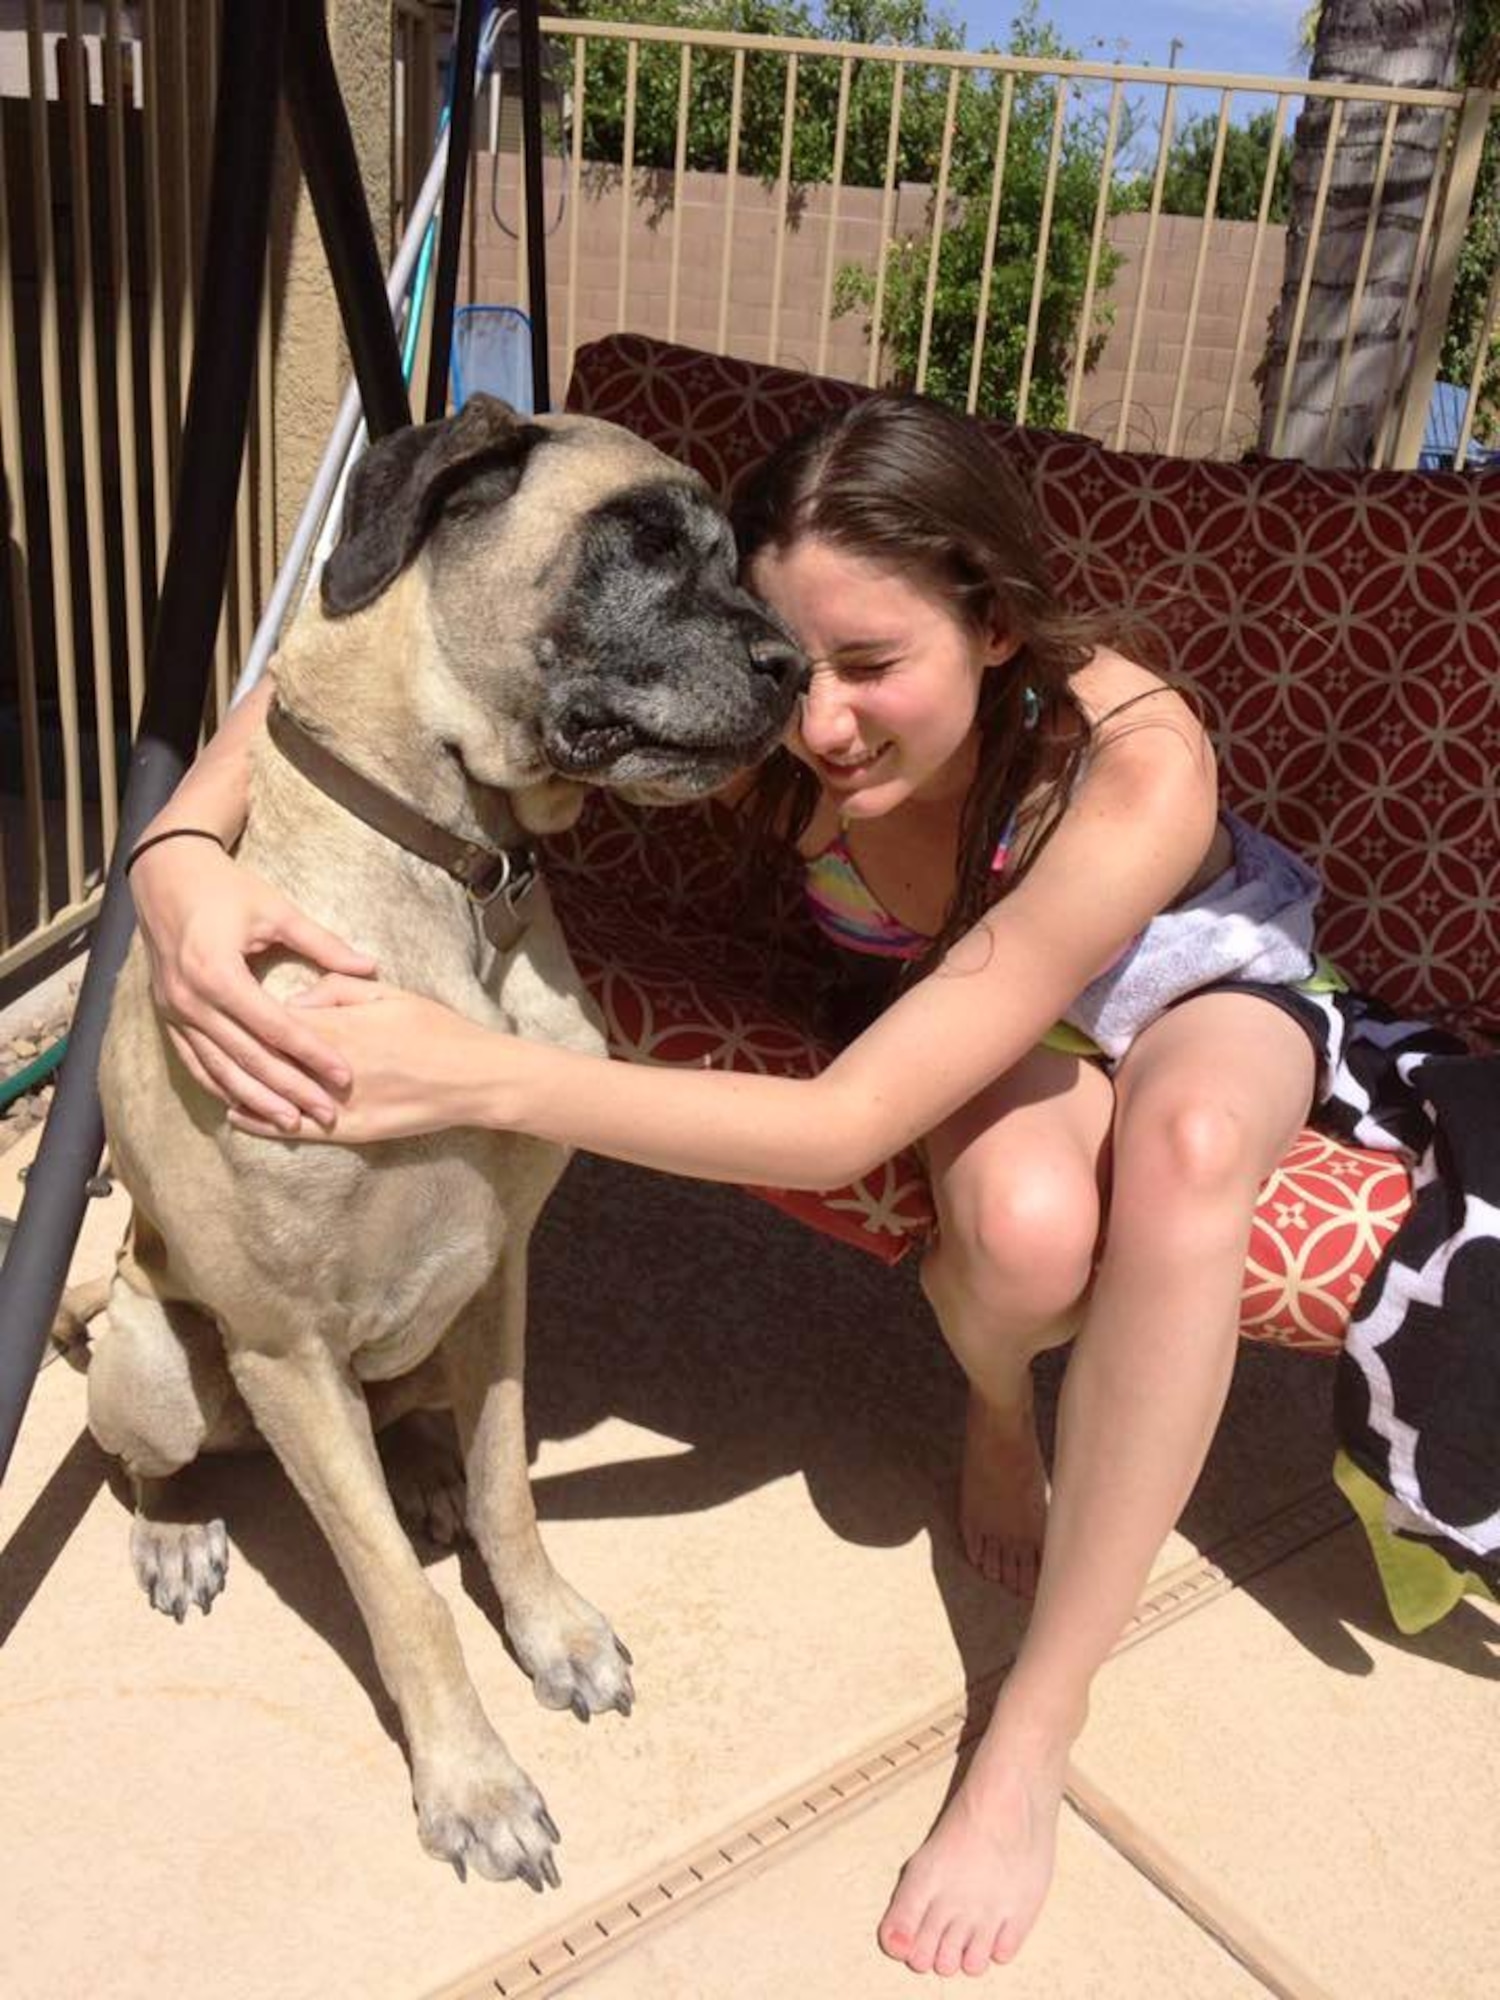 Cadet 2nd Class Emily Martin shares a moment with her 200-pound mastiff, Scooby, at her parent's home in Gilbert, Arizona earlier this year. Martin is majoring in political science at the U.S. Air Force Academy and hopes to attend flight school after she graduates in 2017. (Courtesy photo)